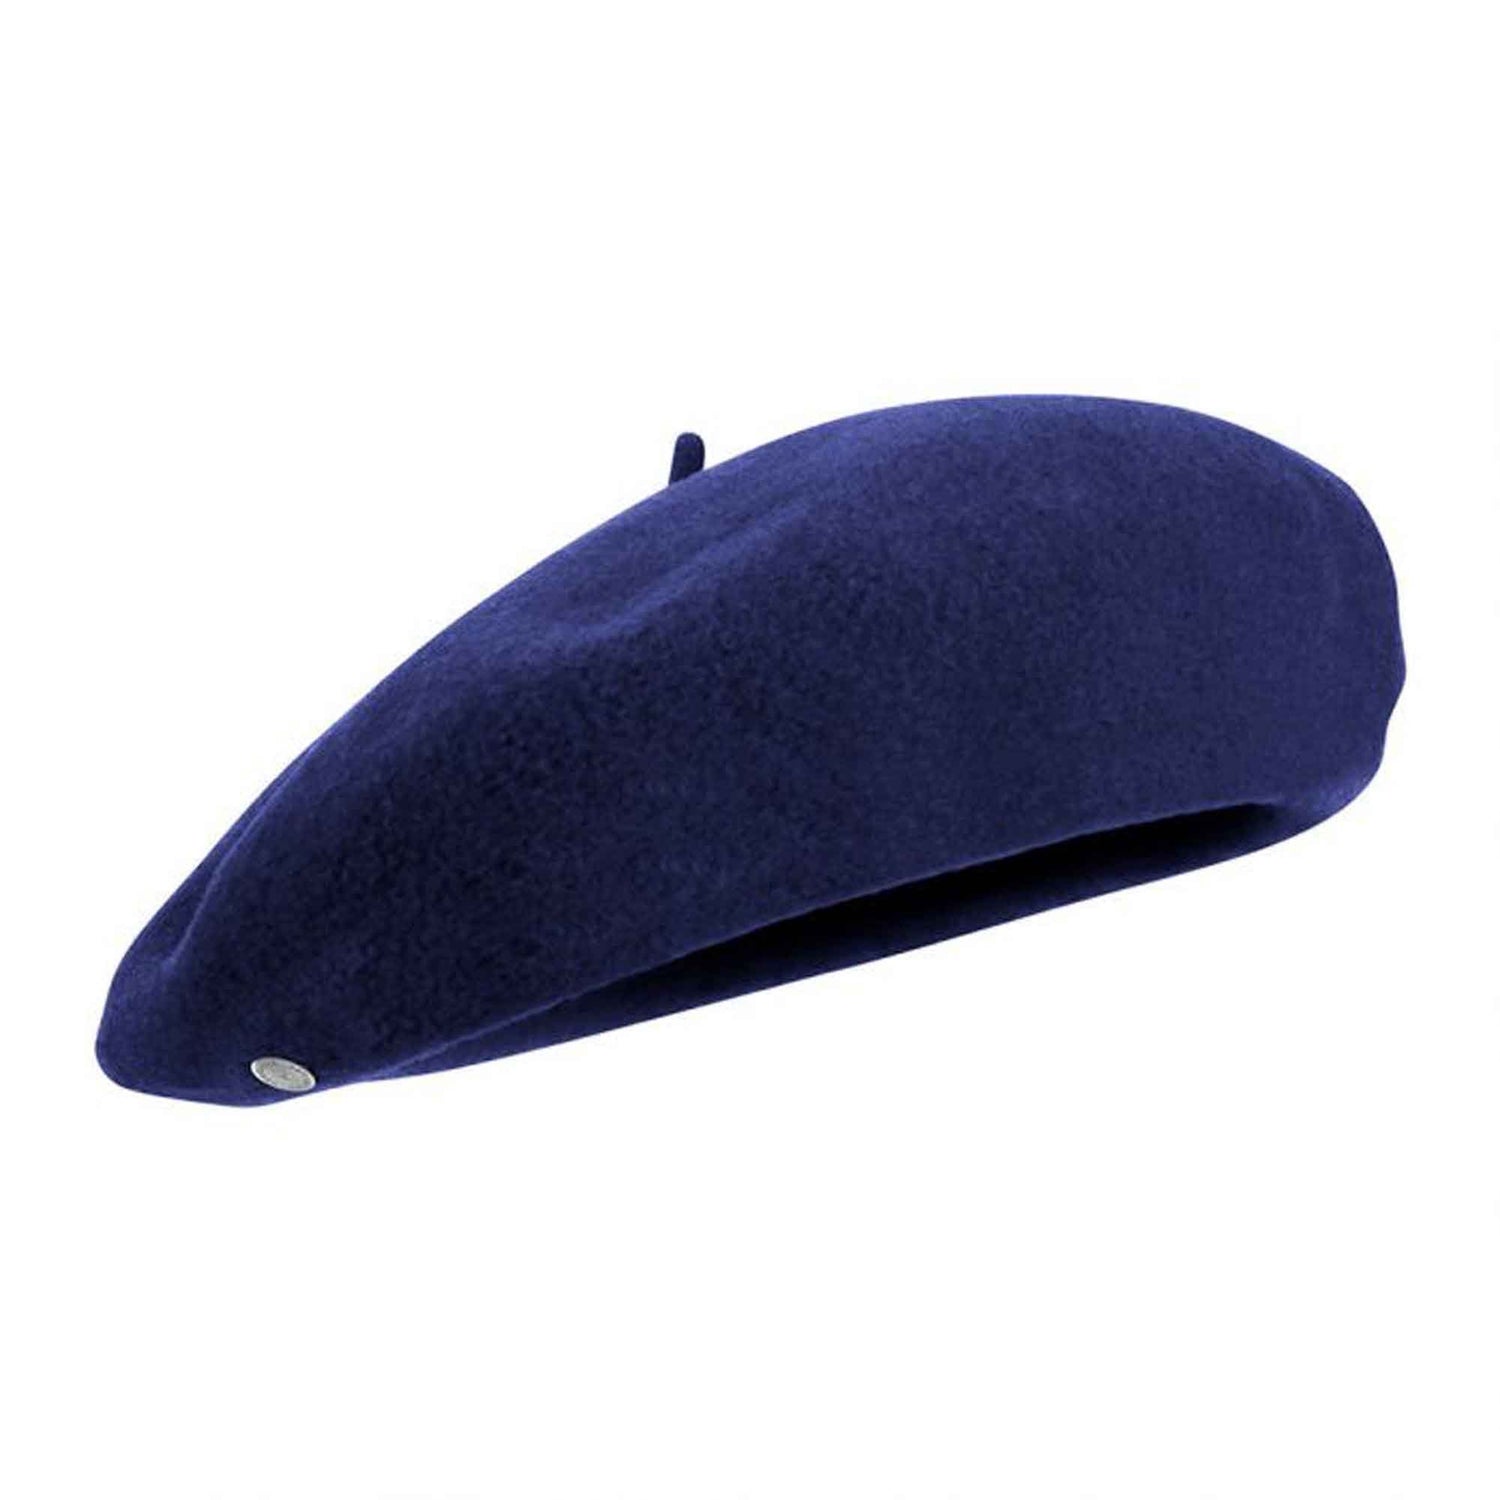 Laulhere Campan 9-1/2" french anglobasque wool beret